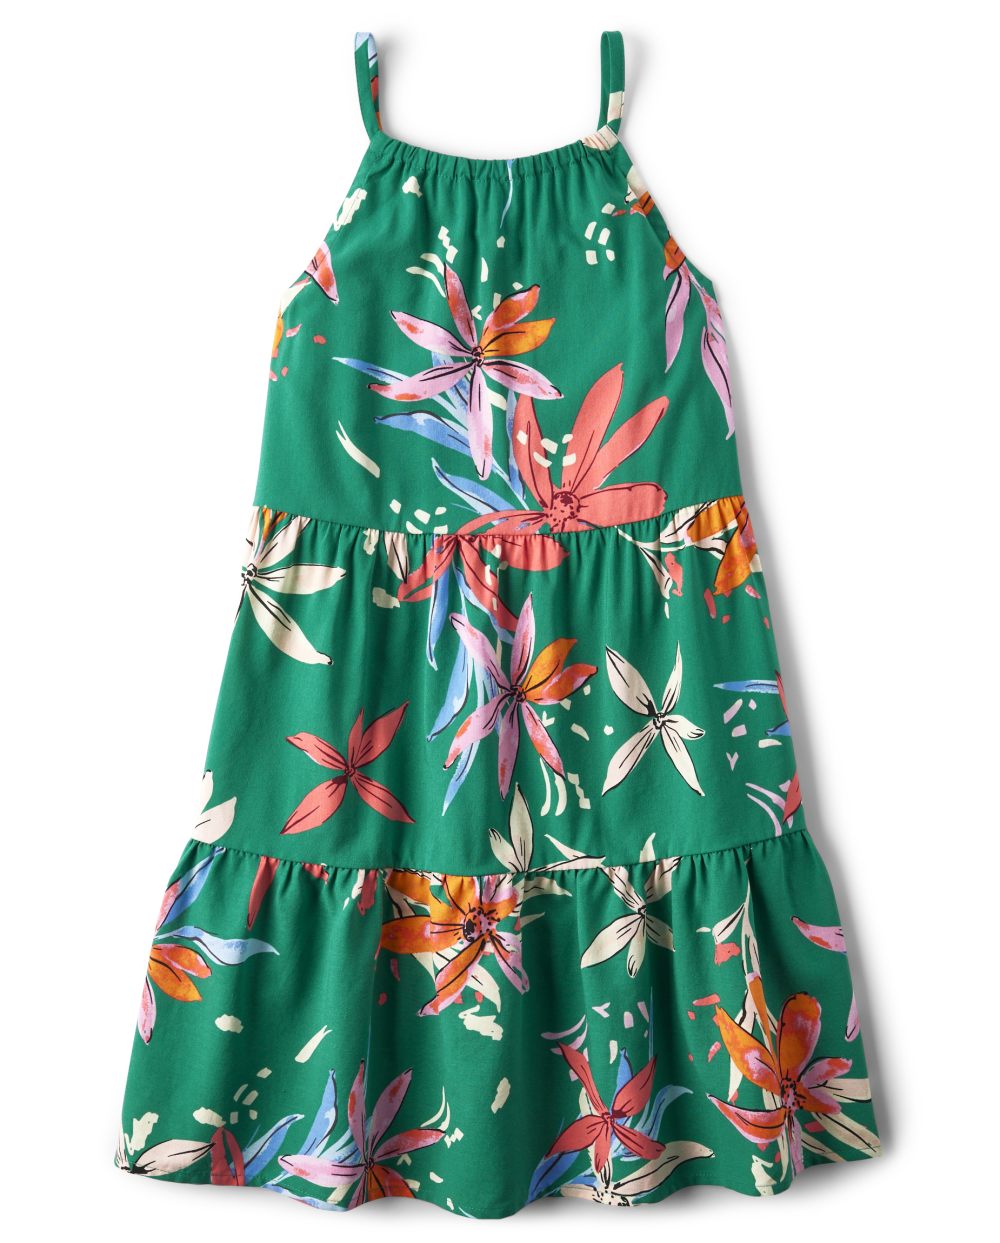 Girls Floral Tropical Print Halter Above the Knee Sleeveless Tiered Dress